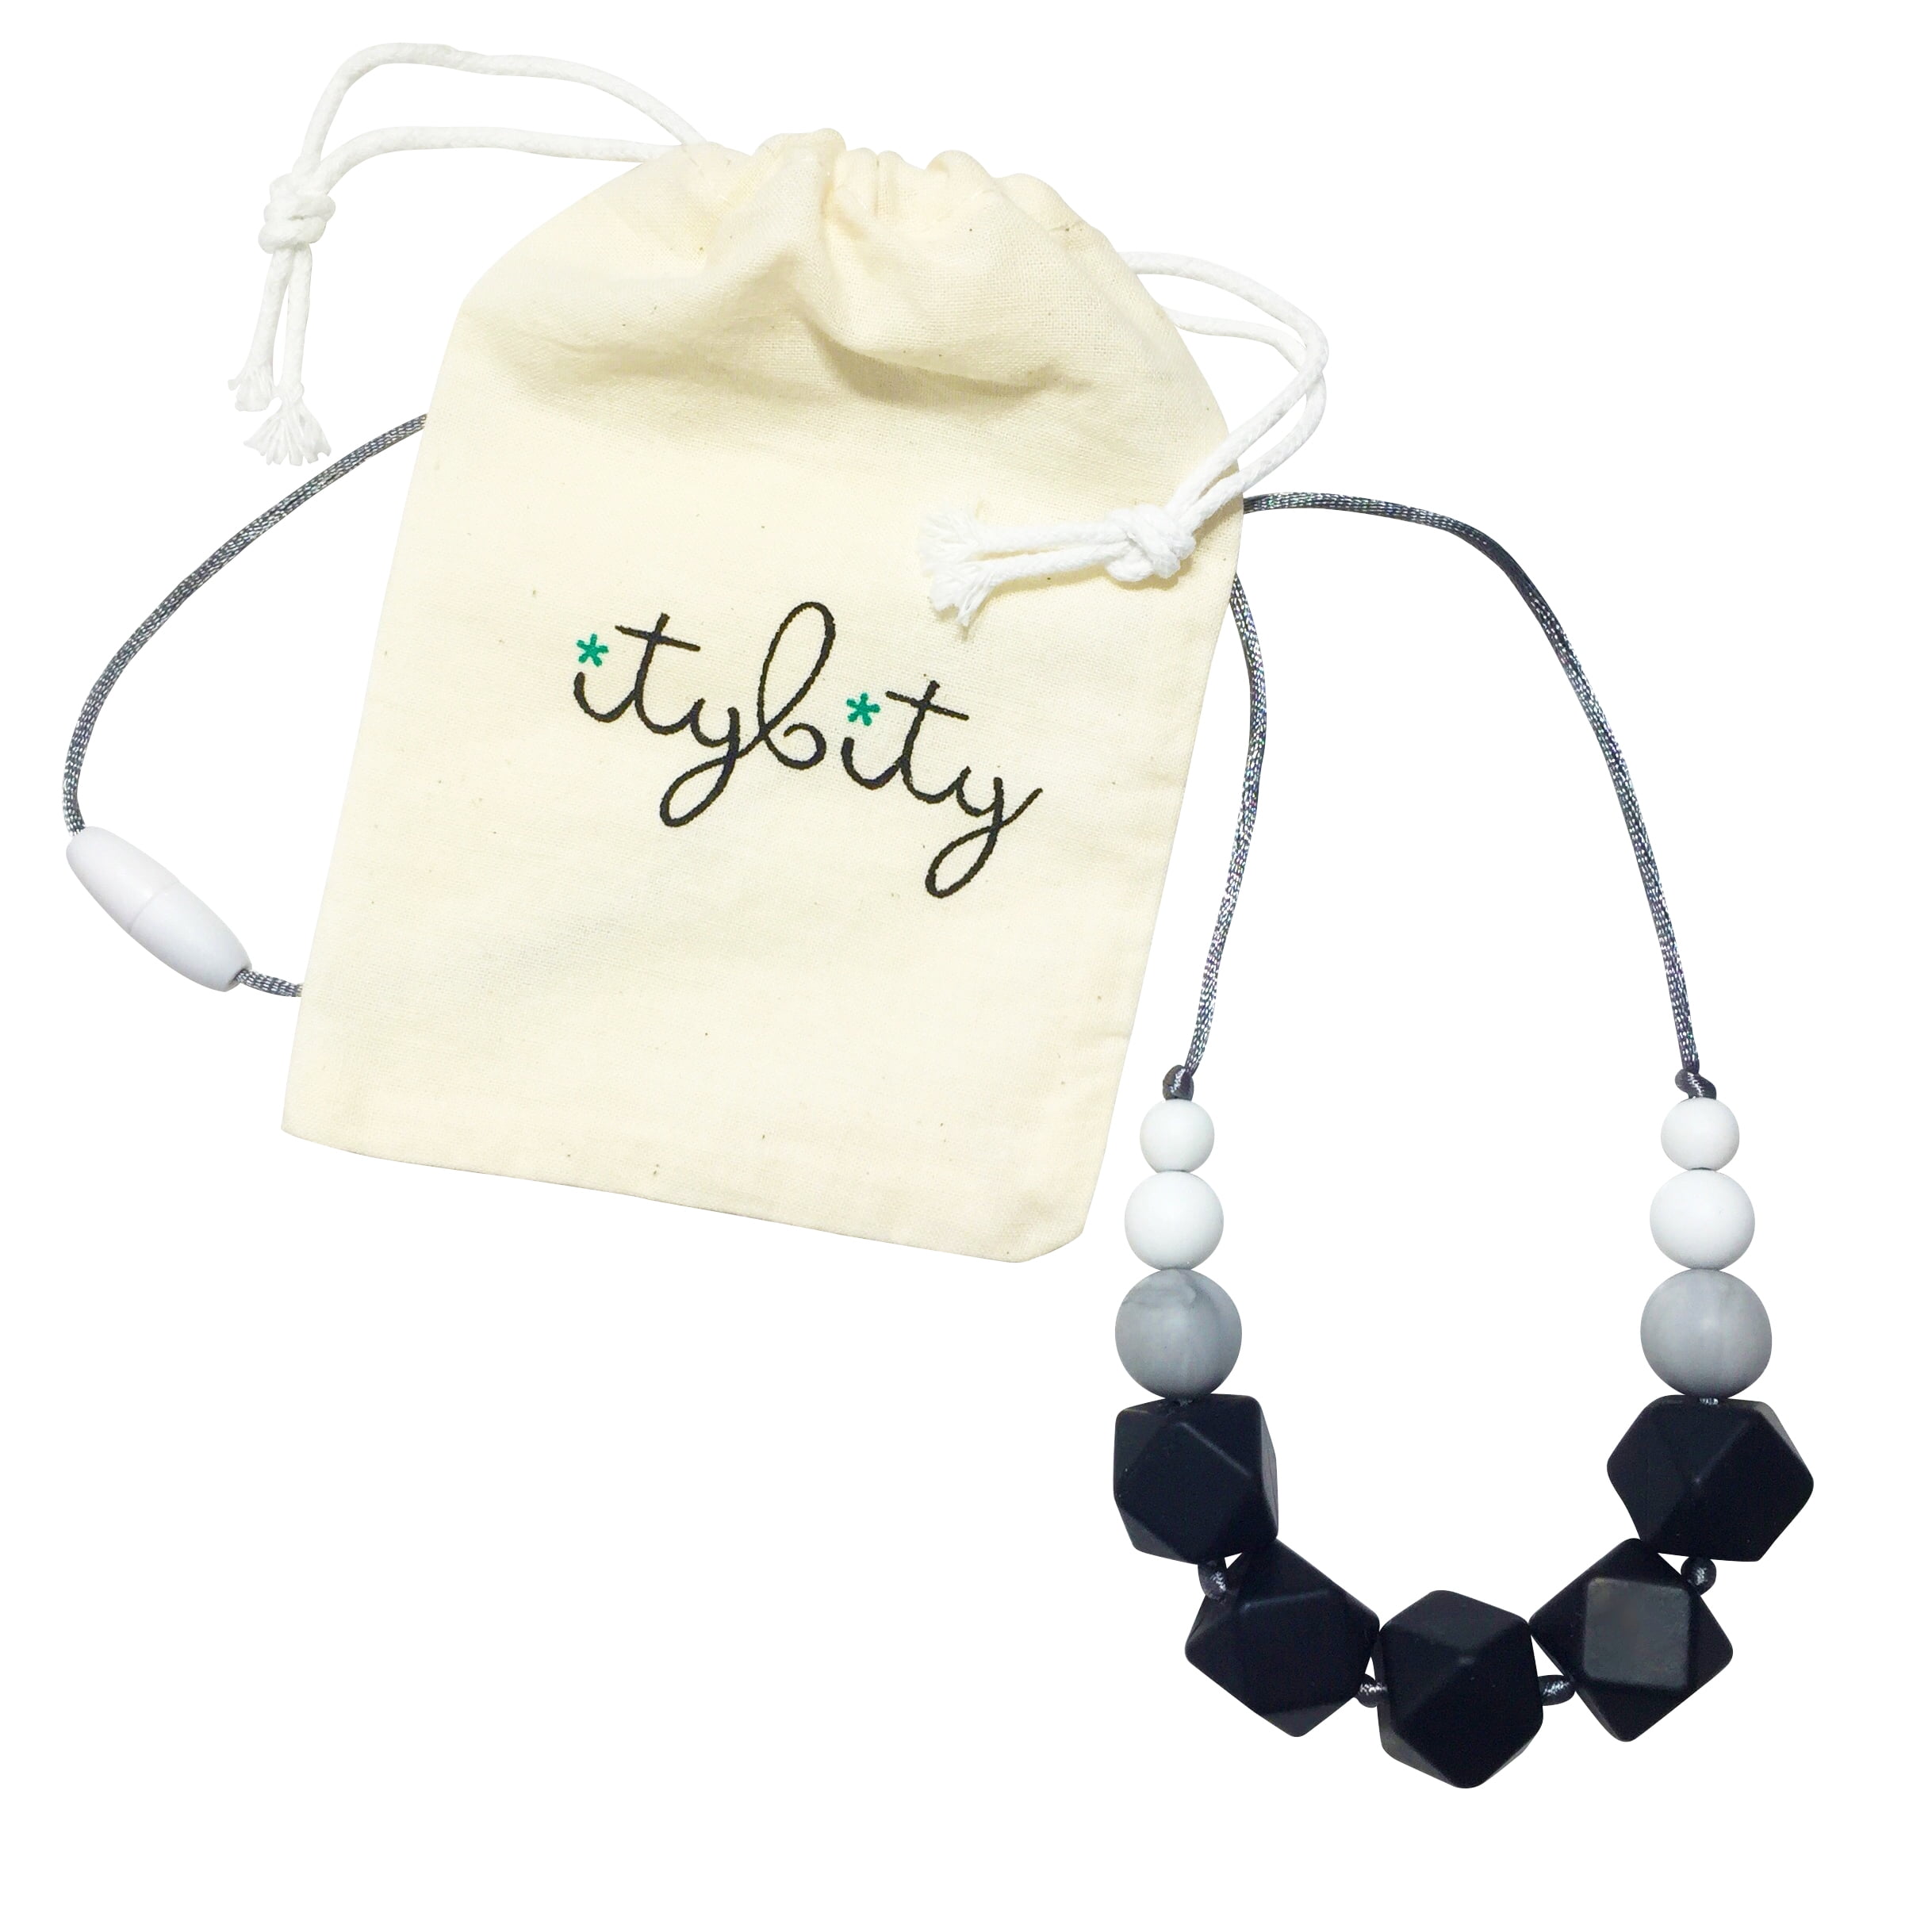 teething necklace for mom walmart